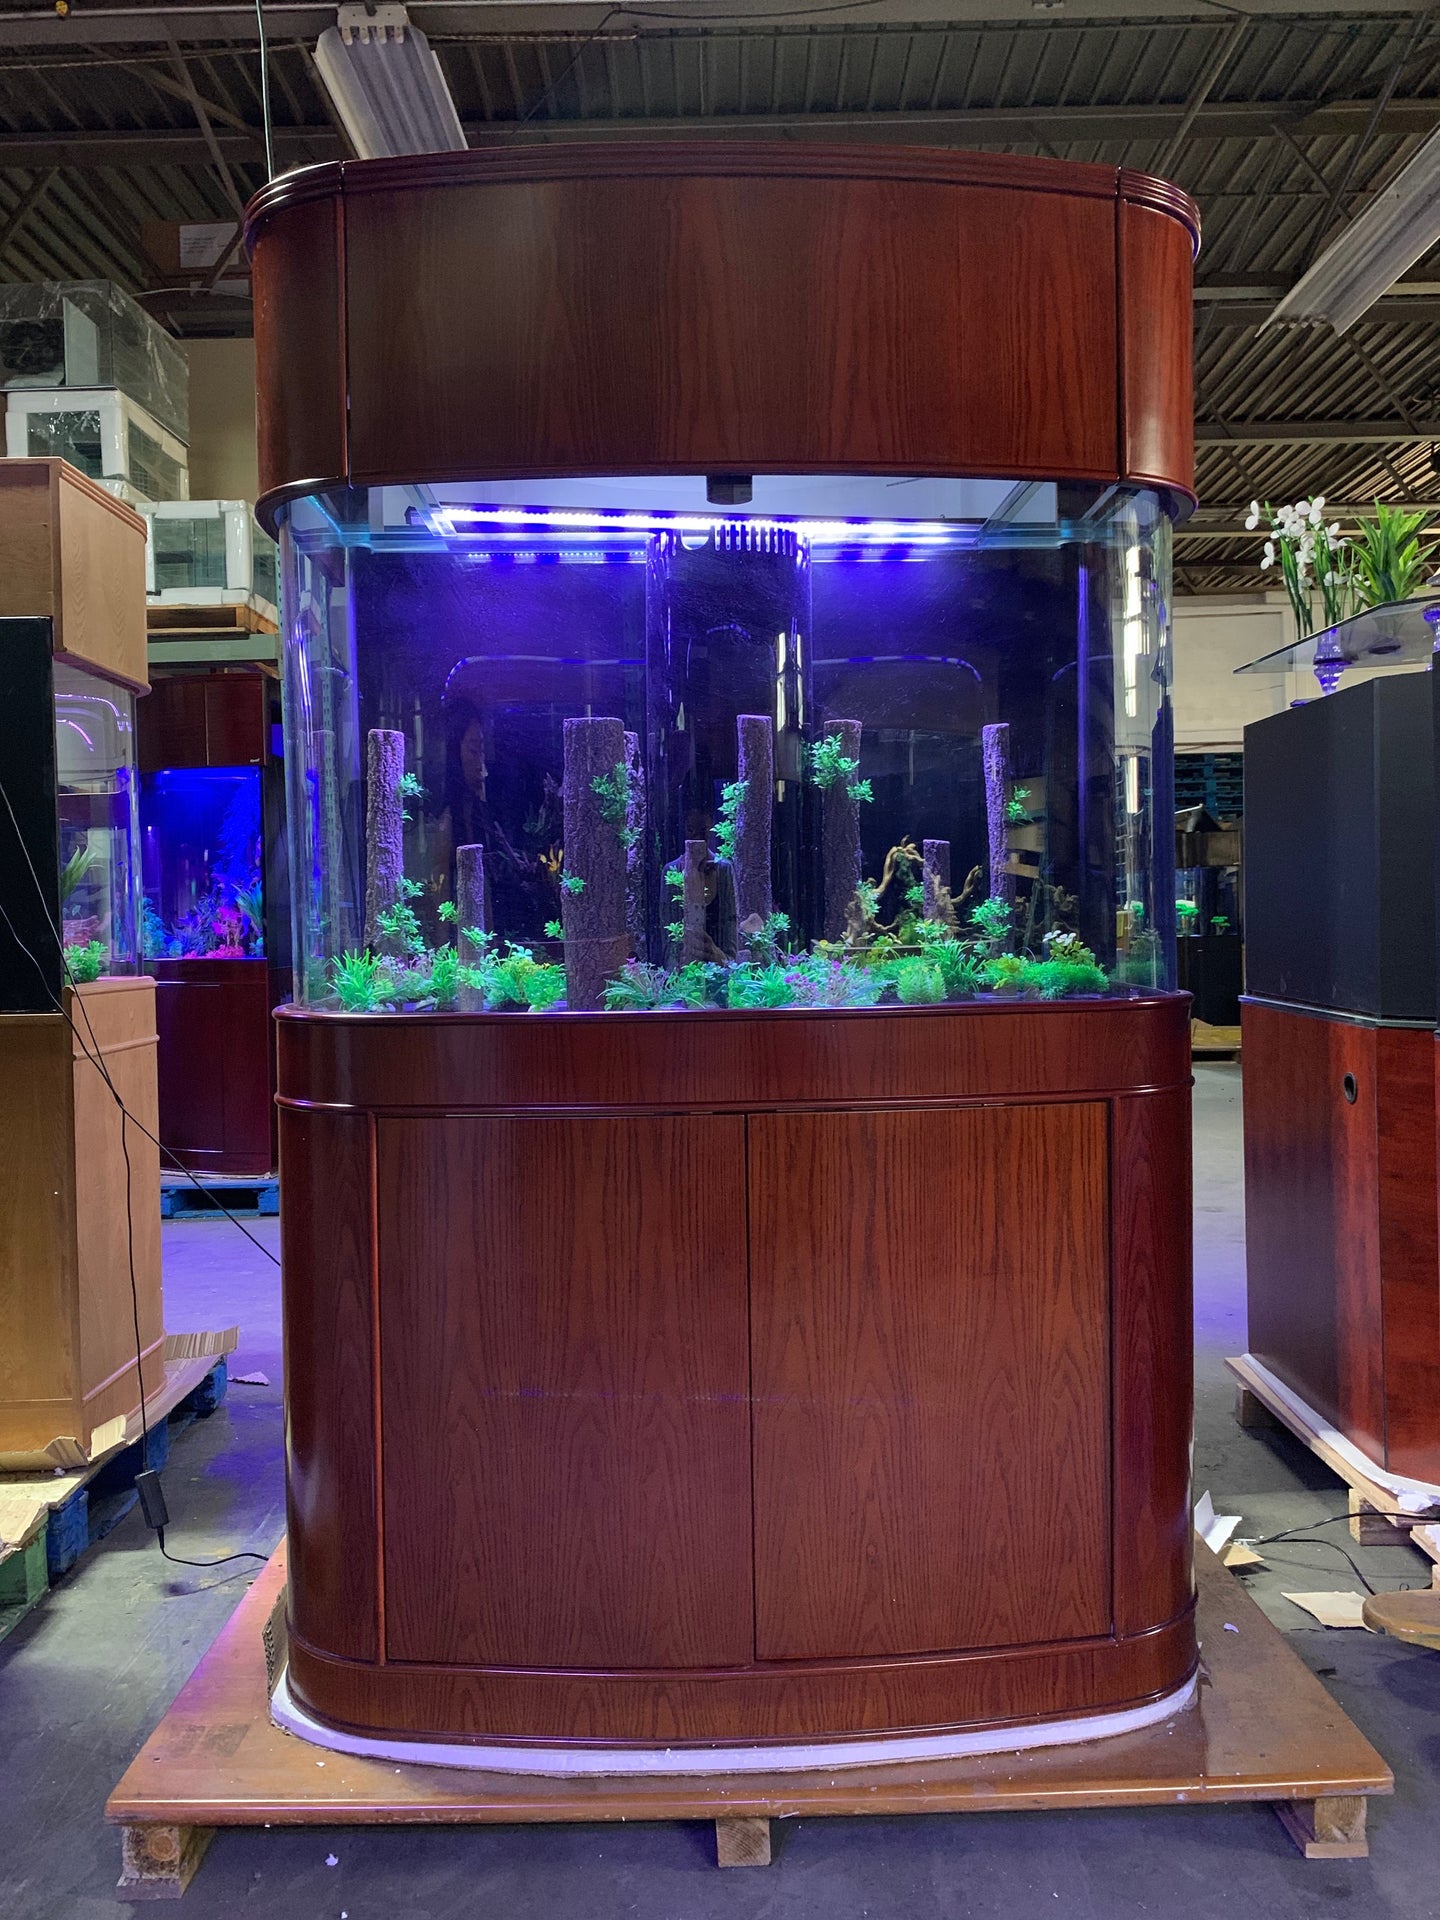 WARRANTY INCLUDED! 150 gallon GLASS bow front aquarium fish tank in cherry